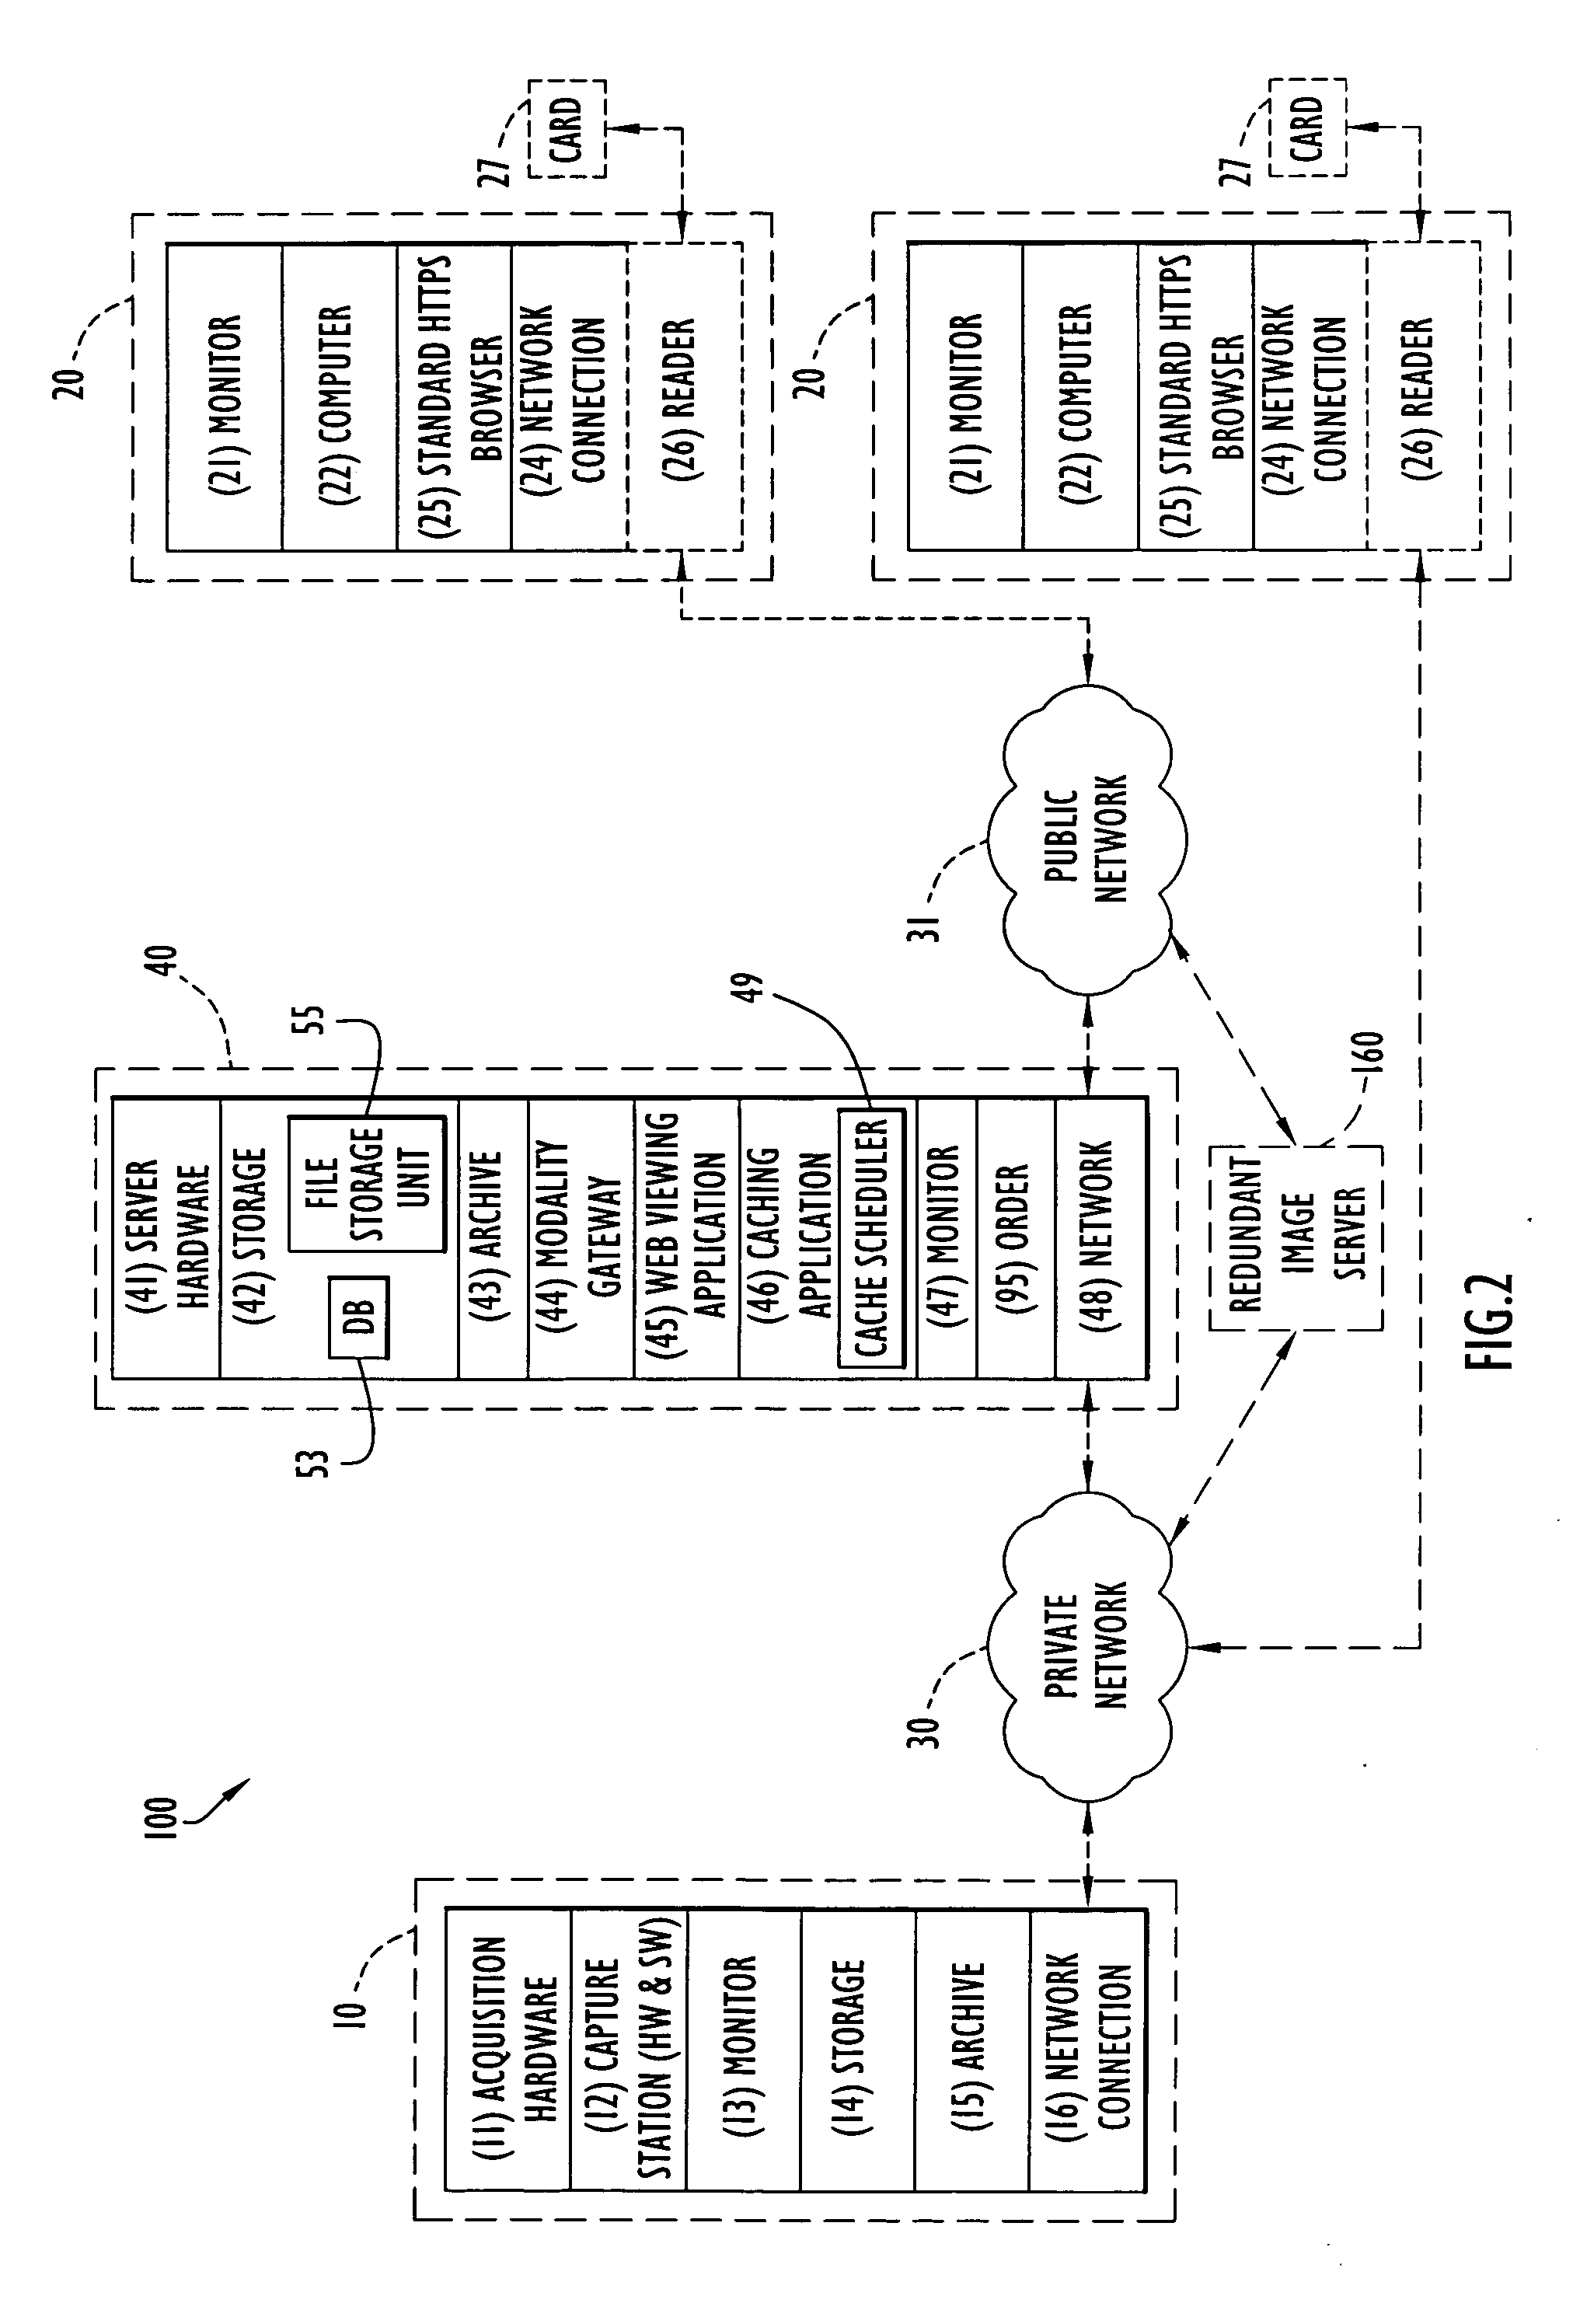 System and method for efficient diagnostic analysis of ophthalmic examinations